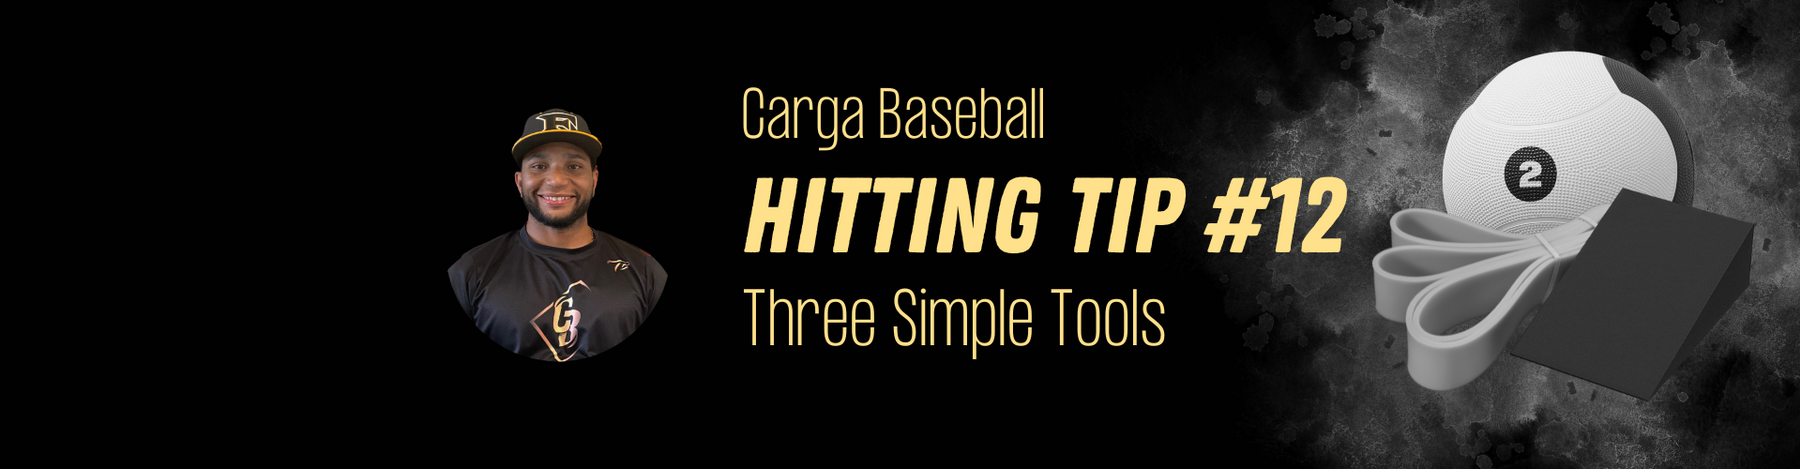 Hitting Tips from Carlos #12: Three Simple Tools